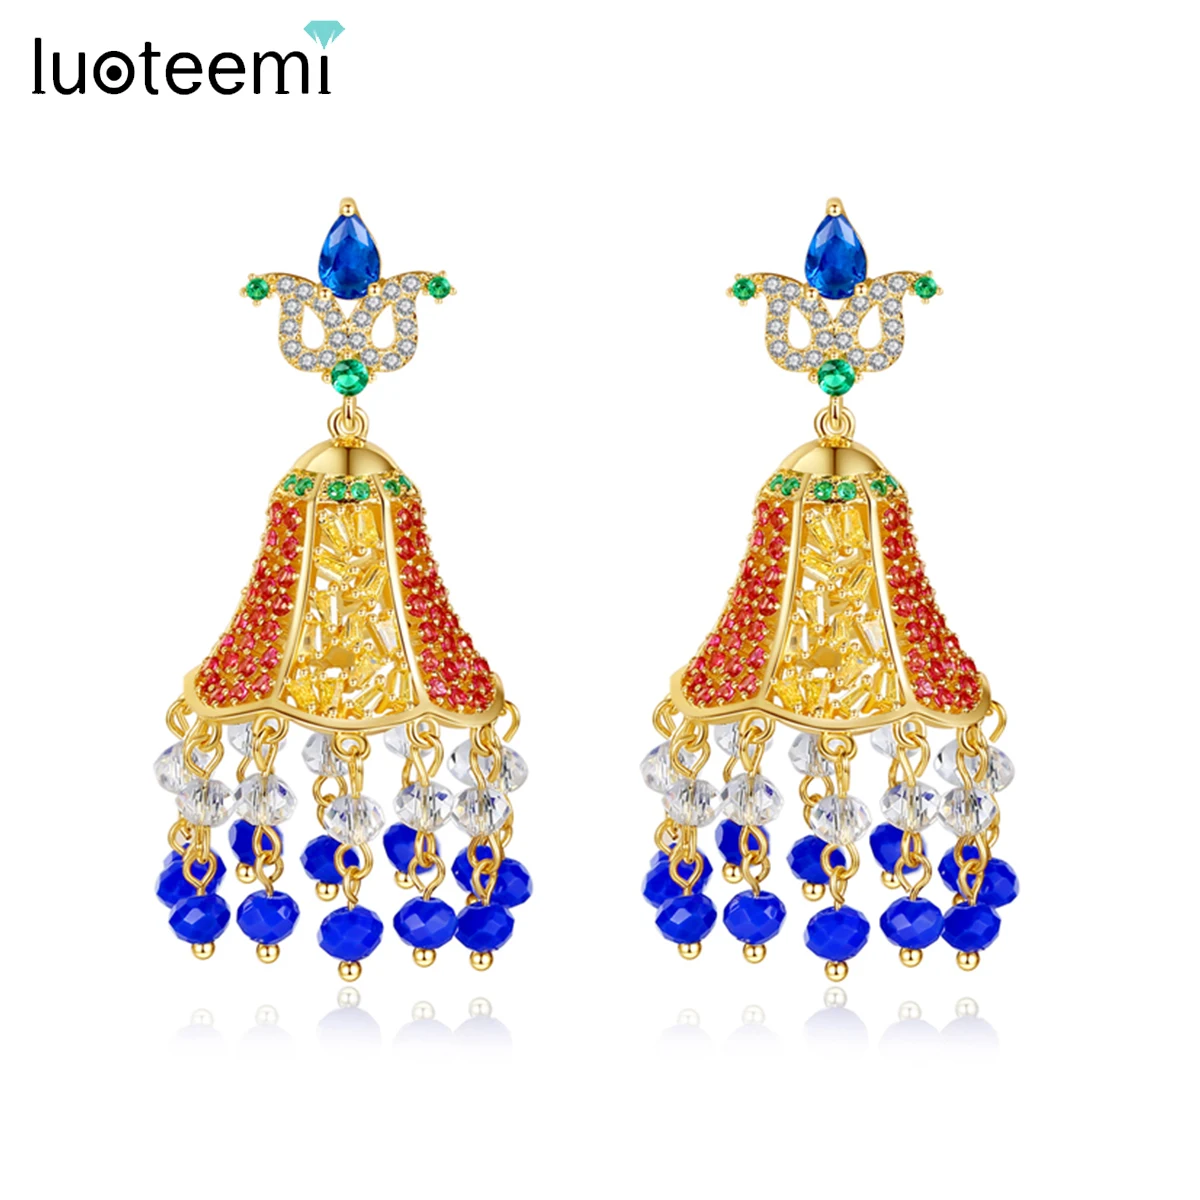 

LUOTEEMI Double Color Indian Design Drop Earrings for Women Ladies Wedding Party Green/Blue Beads Ethnic Brincos Christmas Gifts